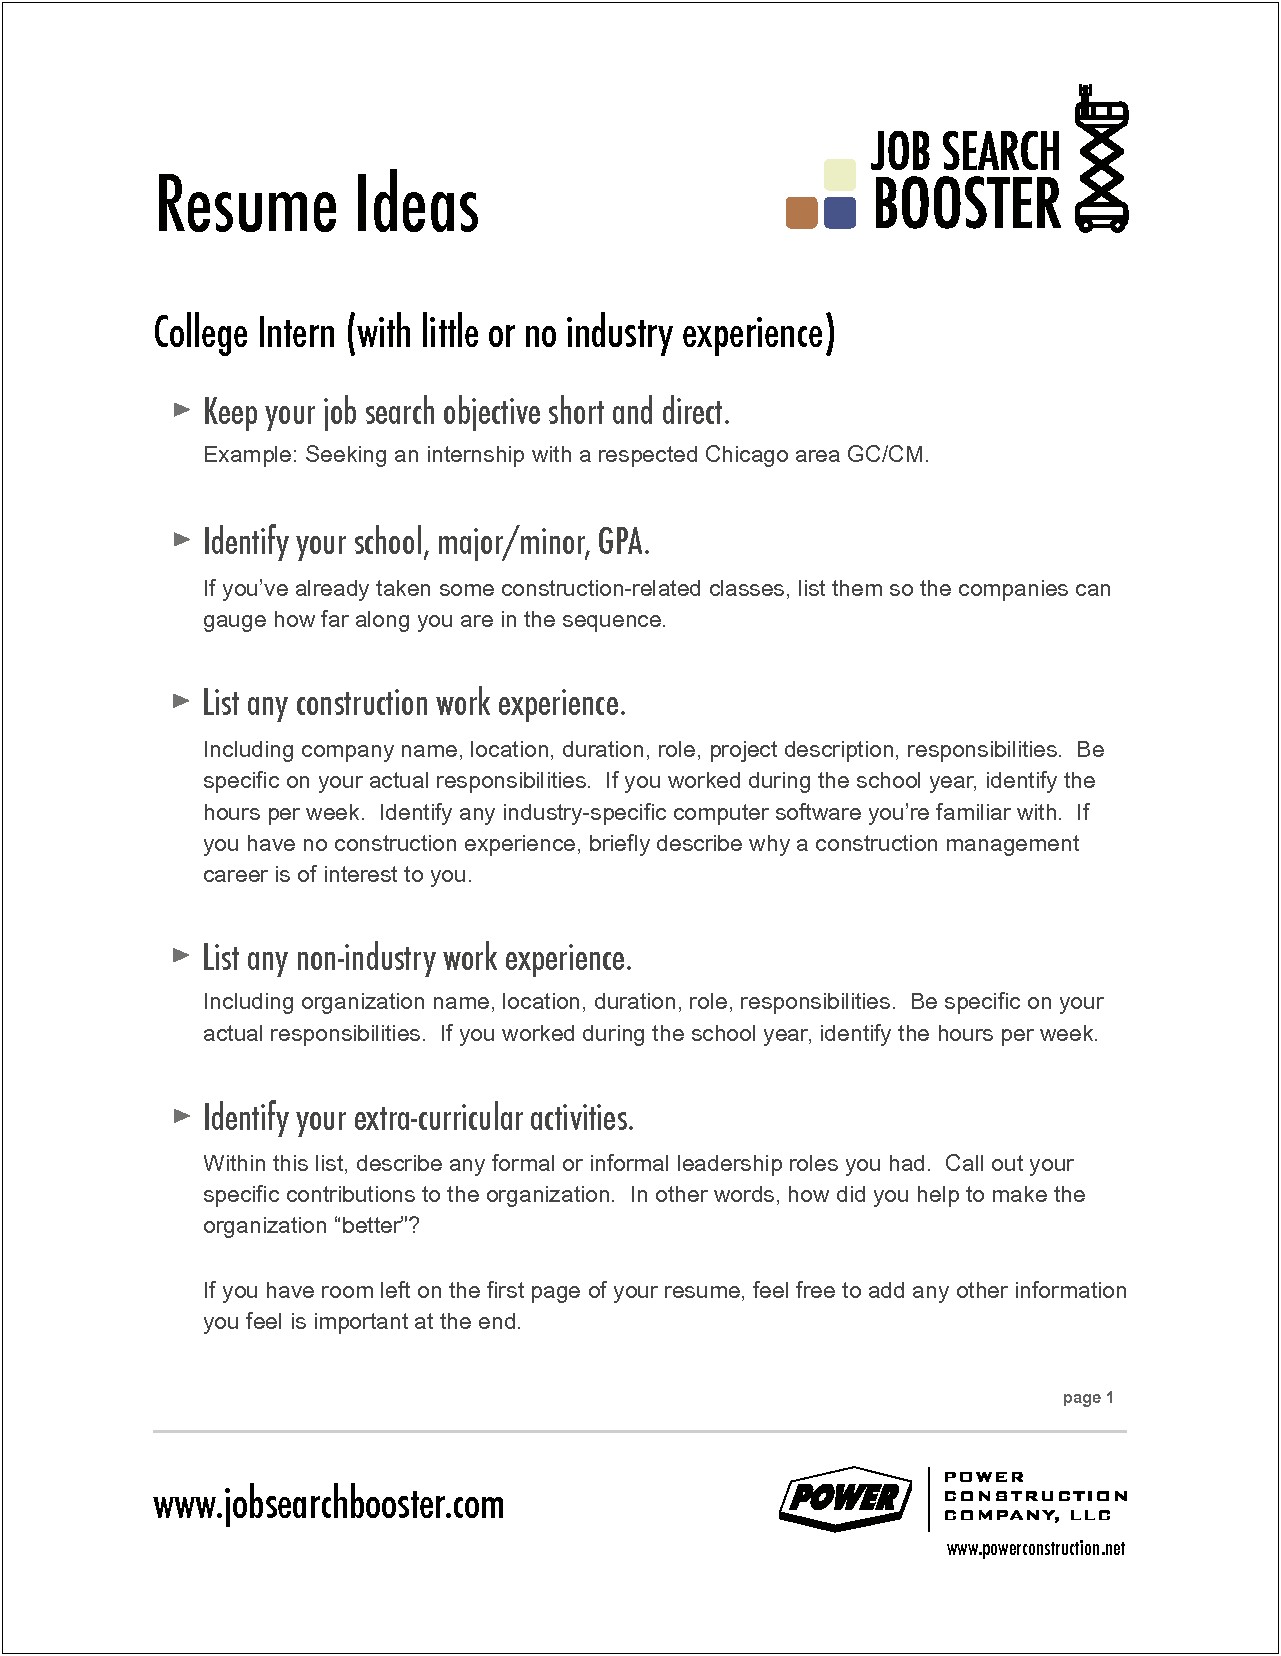 Resume Objective Examples For Retail Position